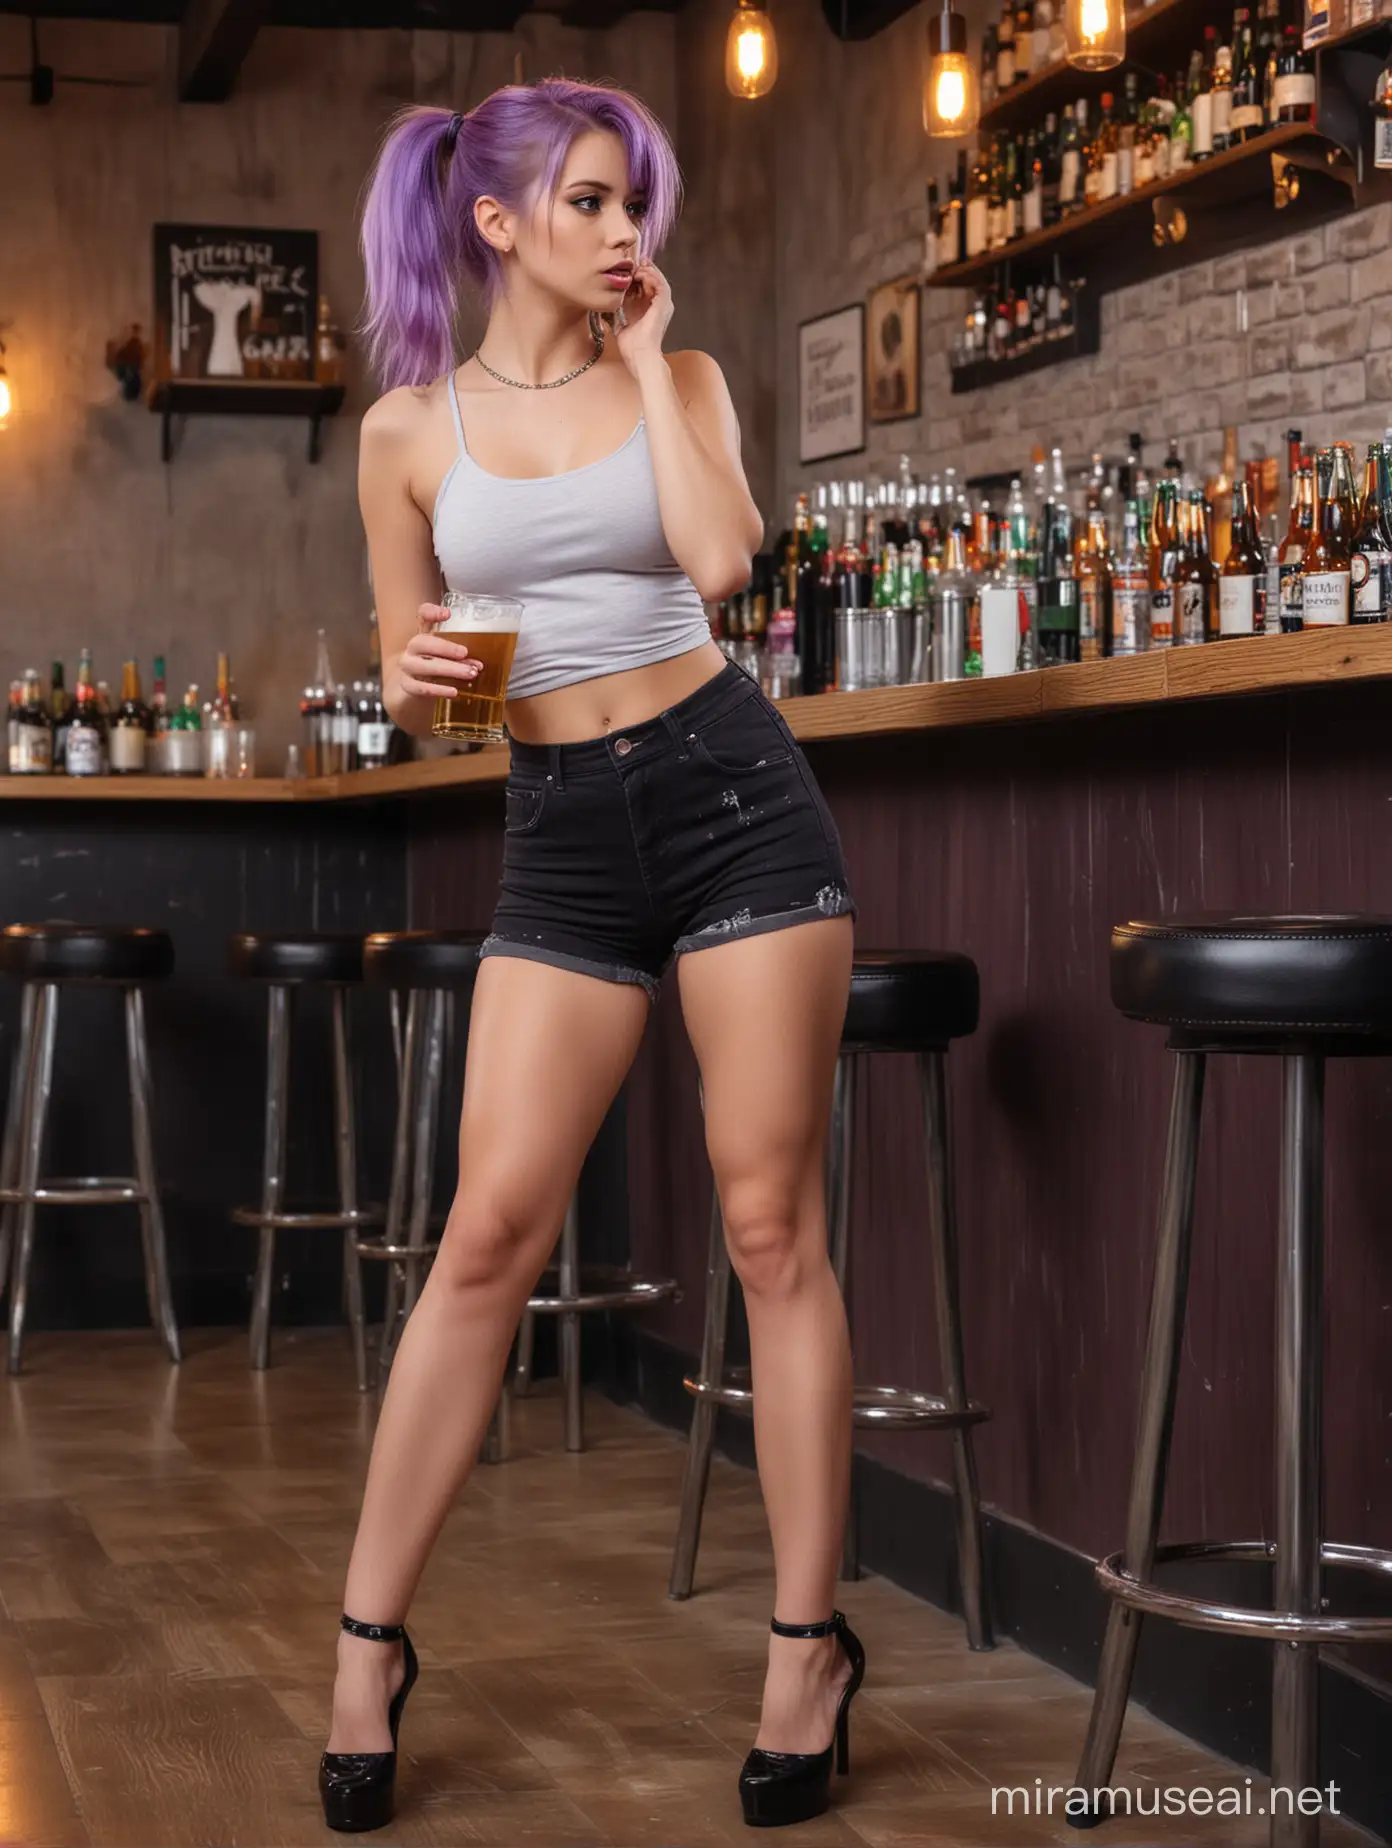 short, drunk, pissed off, tired girl drinks beer, short feet, slender legs, narrow shoulders, thin waist, little feet, dancing by the bar counter in a bad place. Violet ponytail hair.